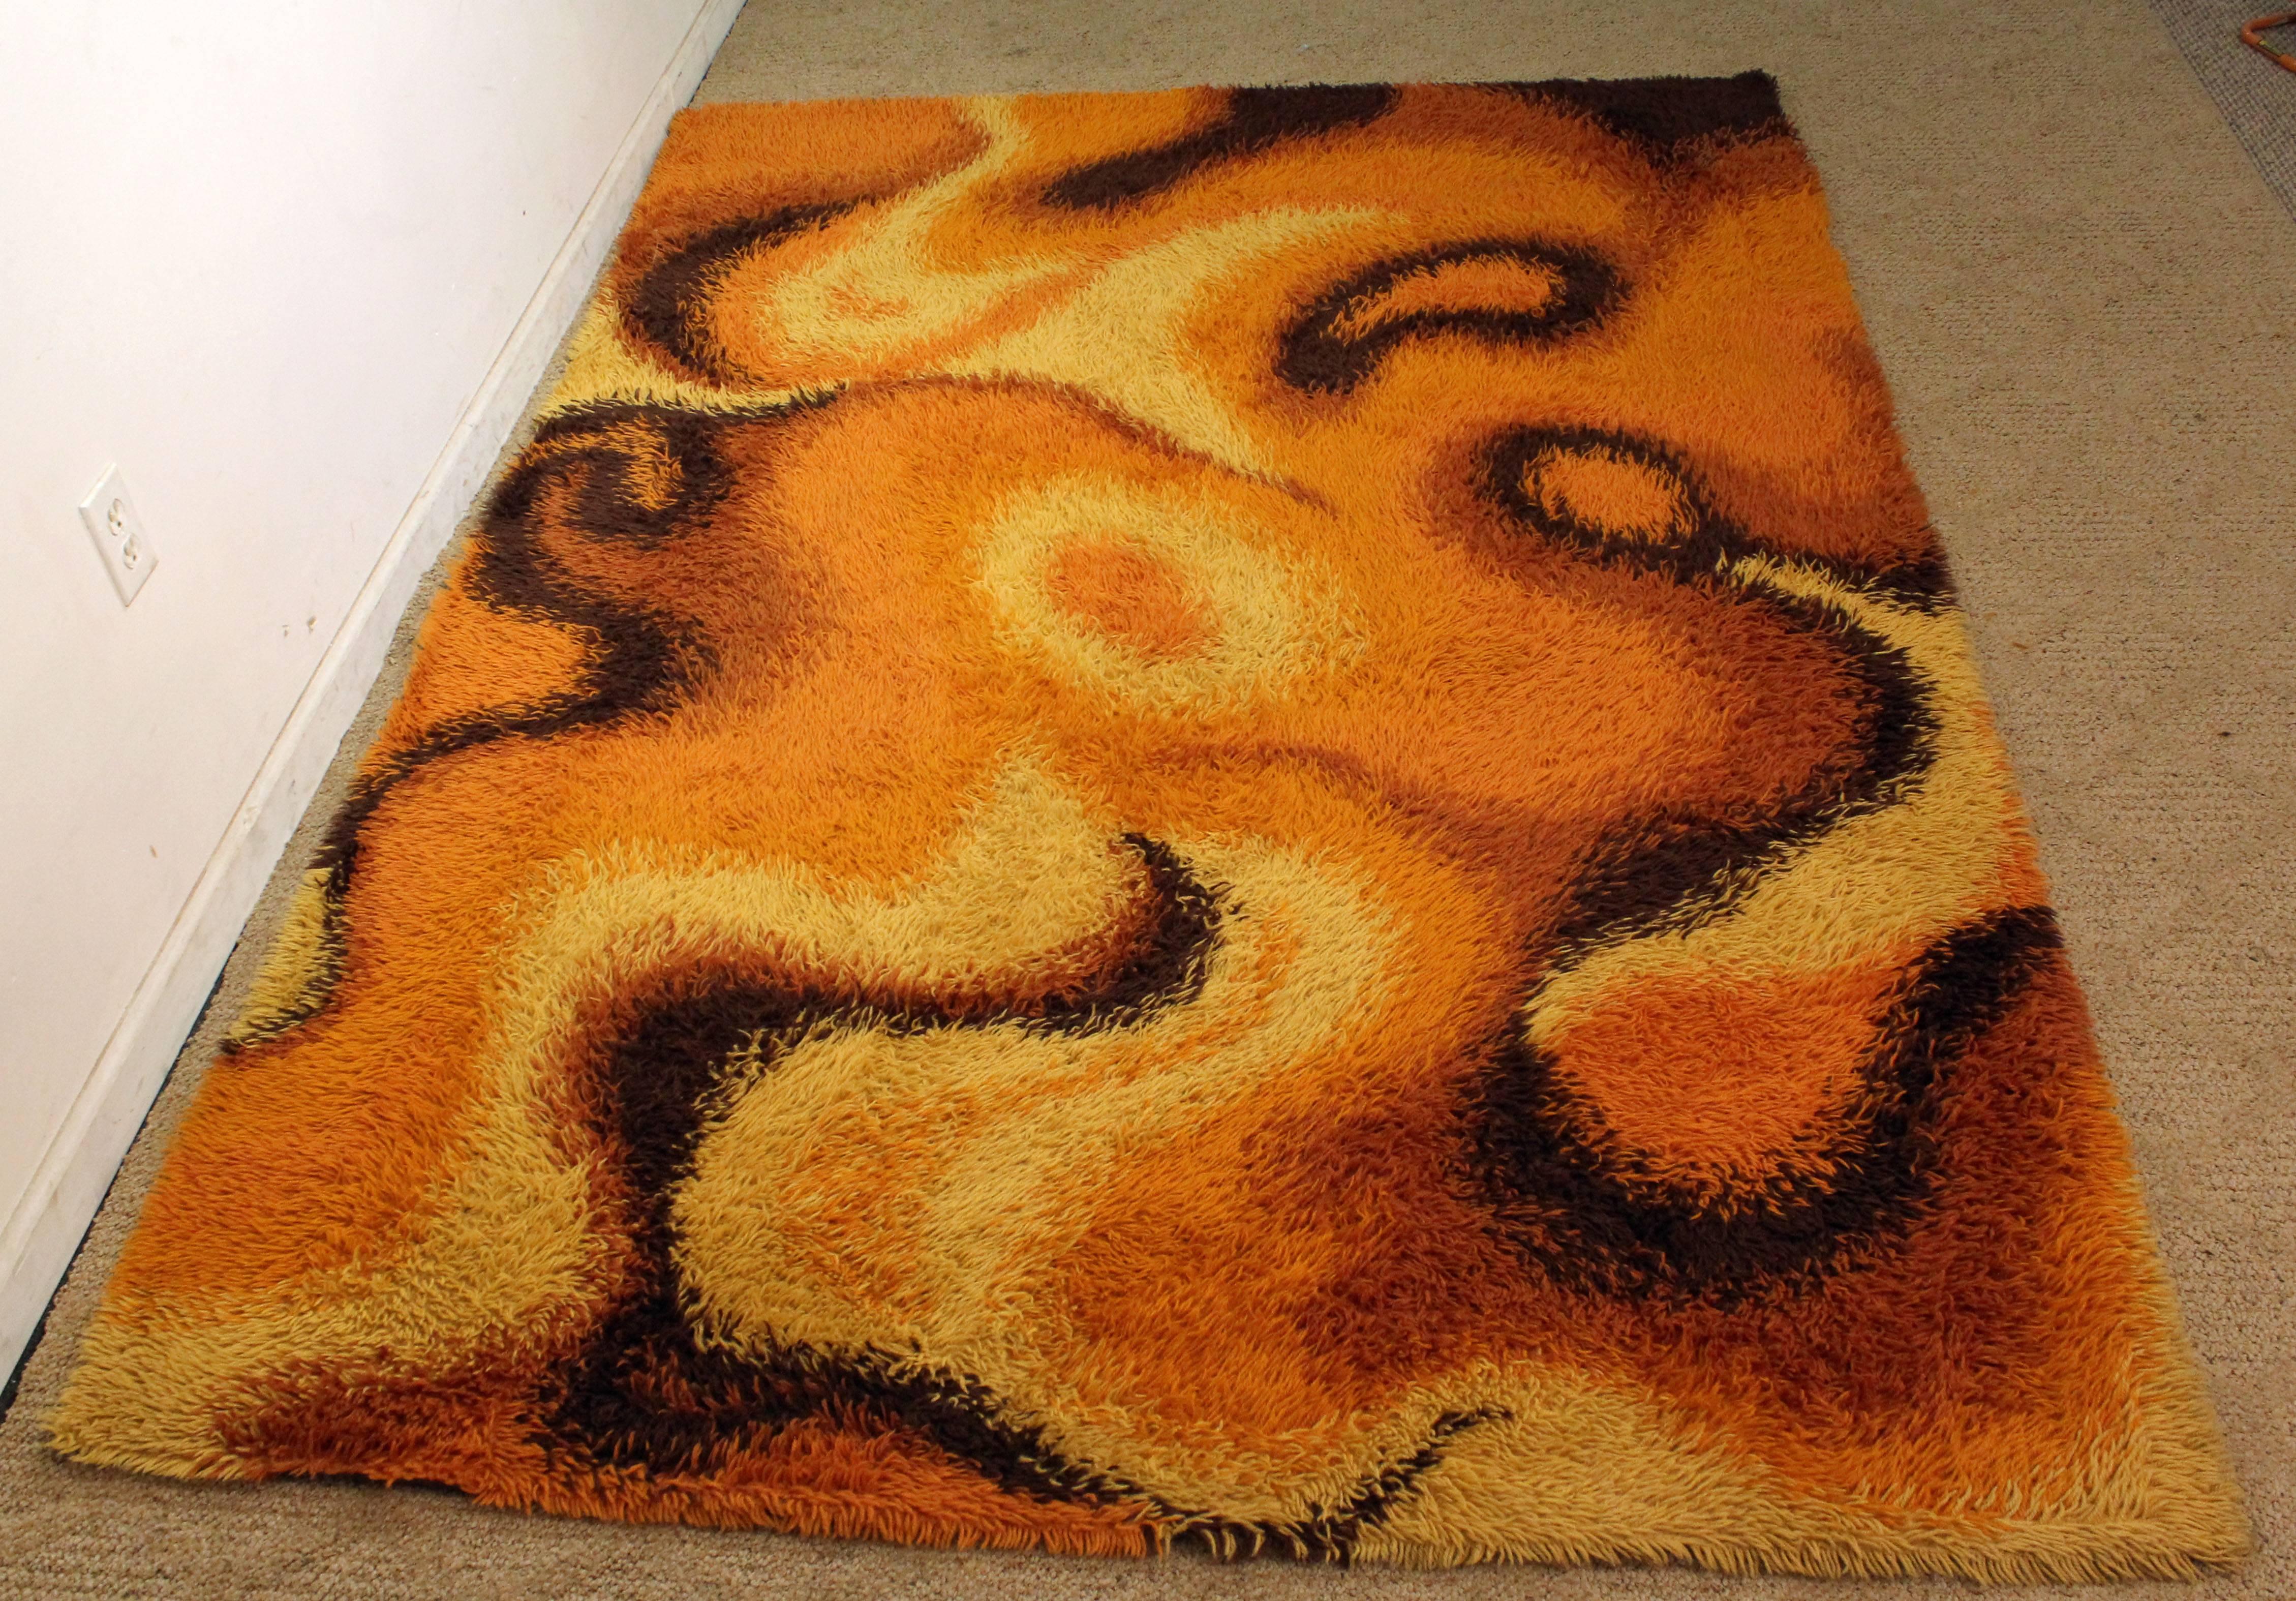 Offered is a midcentury orange shag rug with a groovy design. In good condition, shows some age wear. It is not signed.